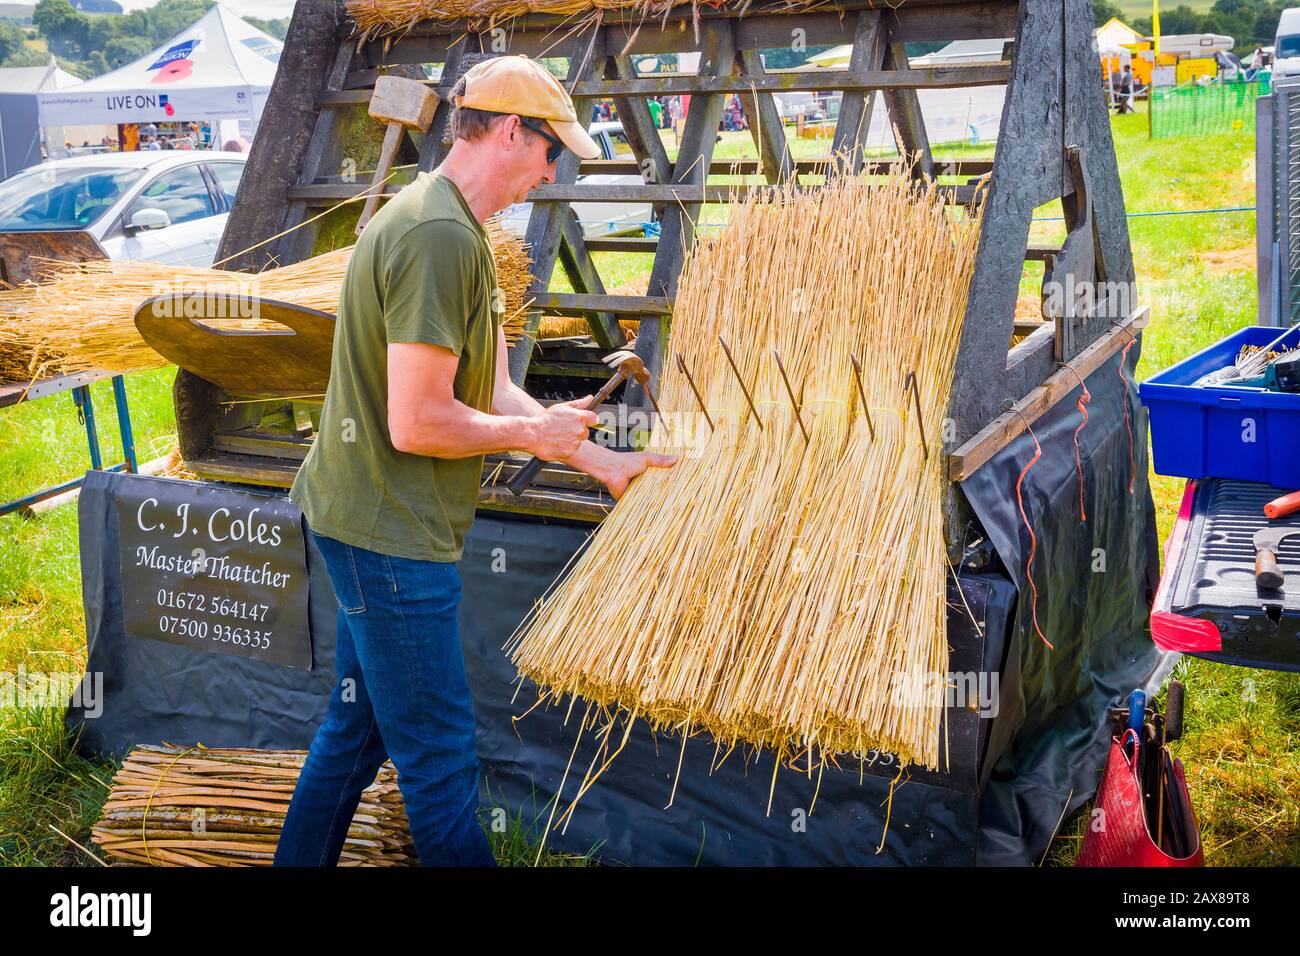 A master thatcher demonstrating his thatching techniques at the Heddington Steam Fair and Country Show in Wiltshire England UK Stock Photo